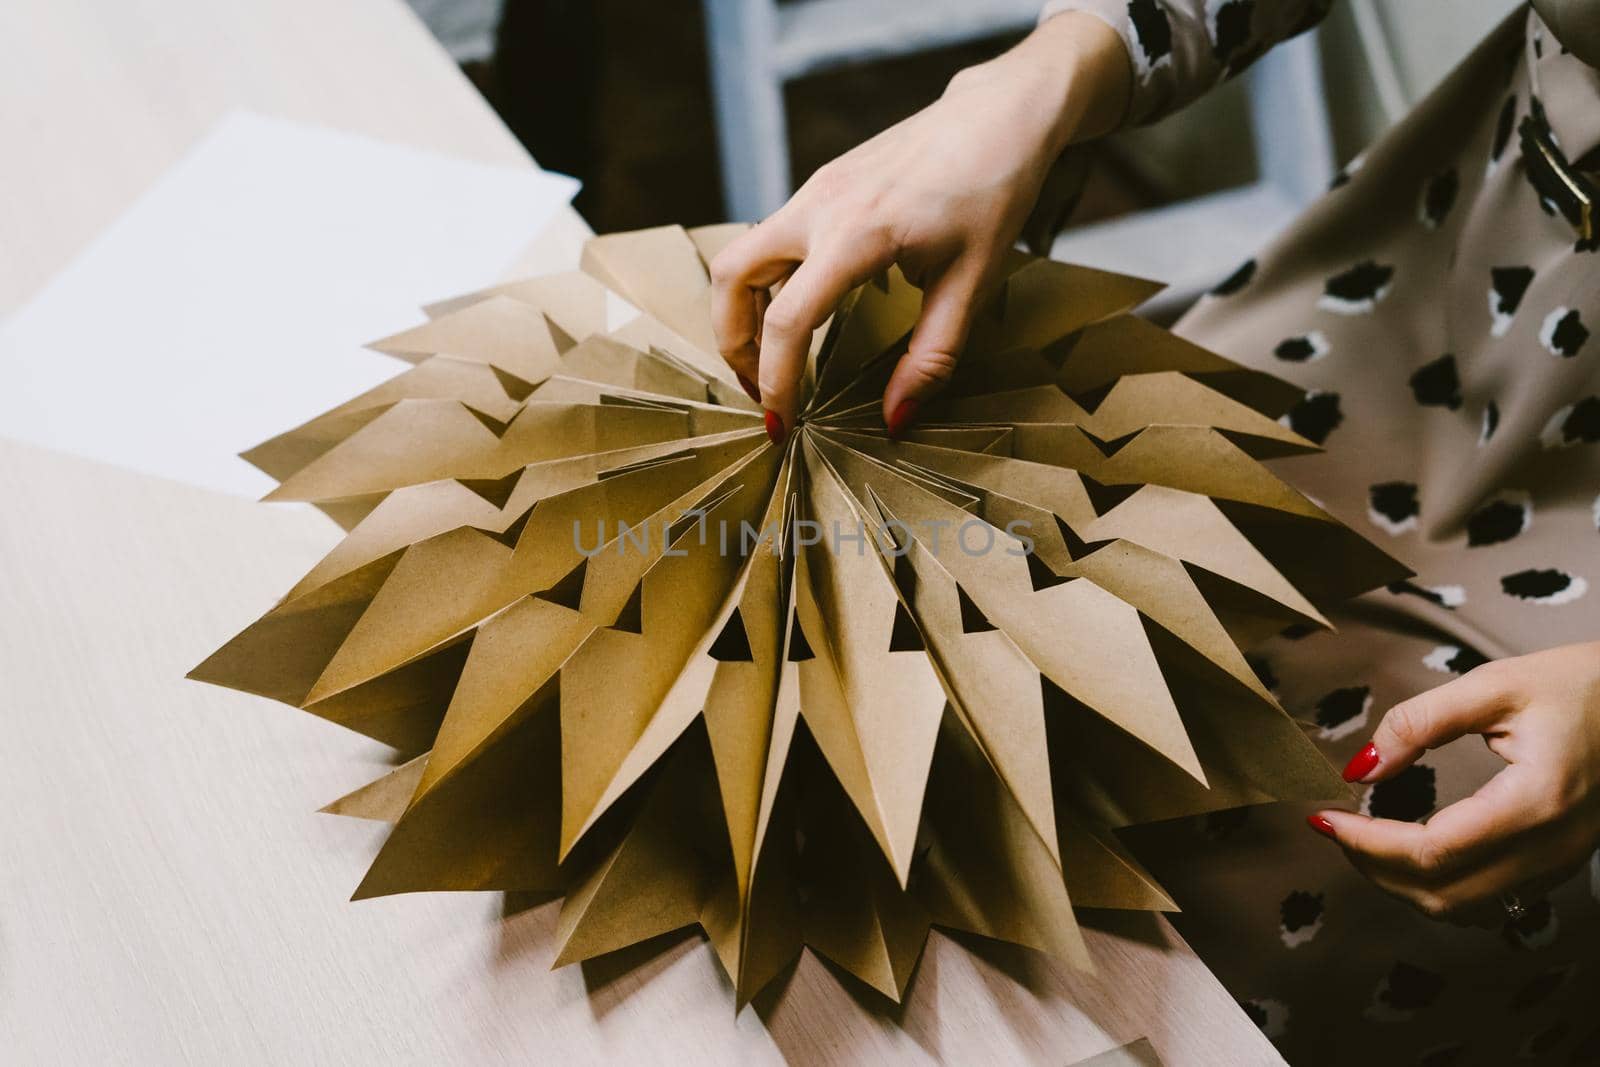 Creating hand made christmas ornaments. The origami stage. by Rodnova